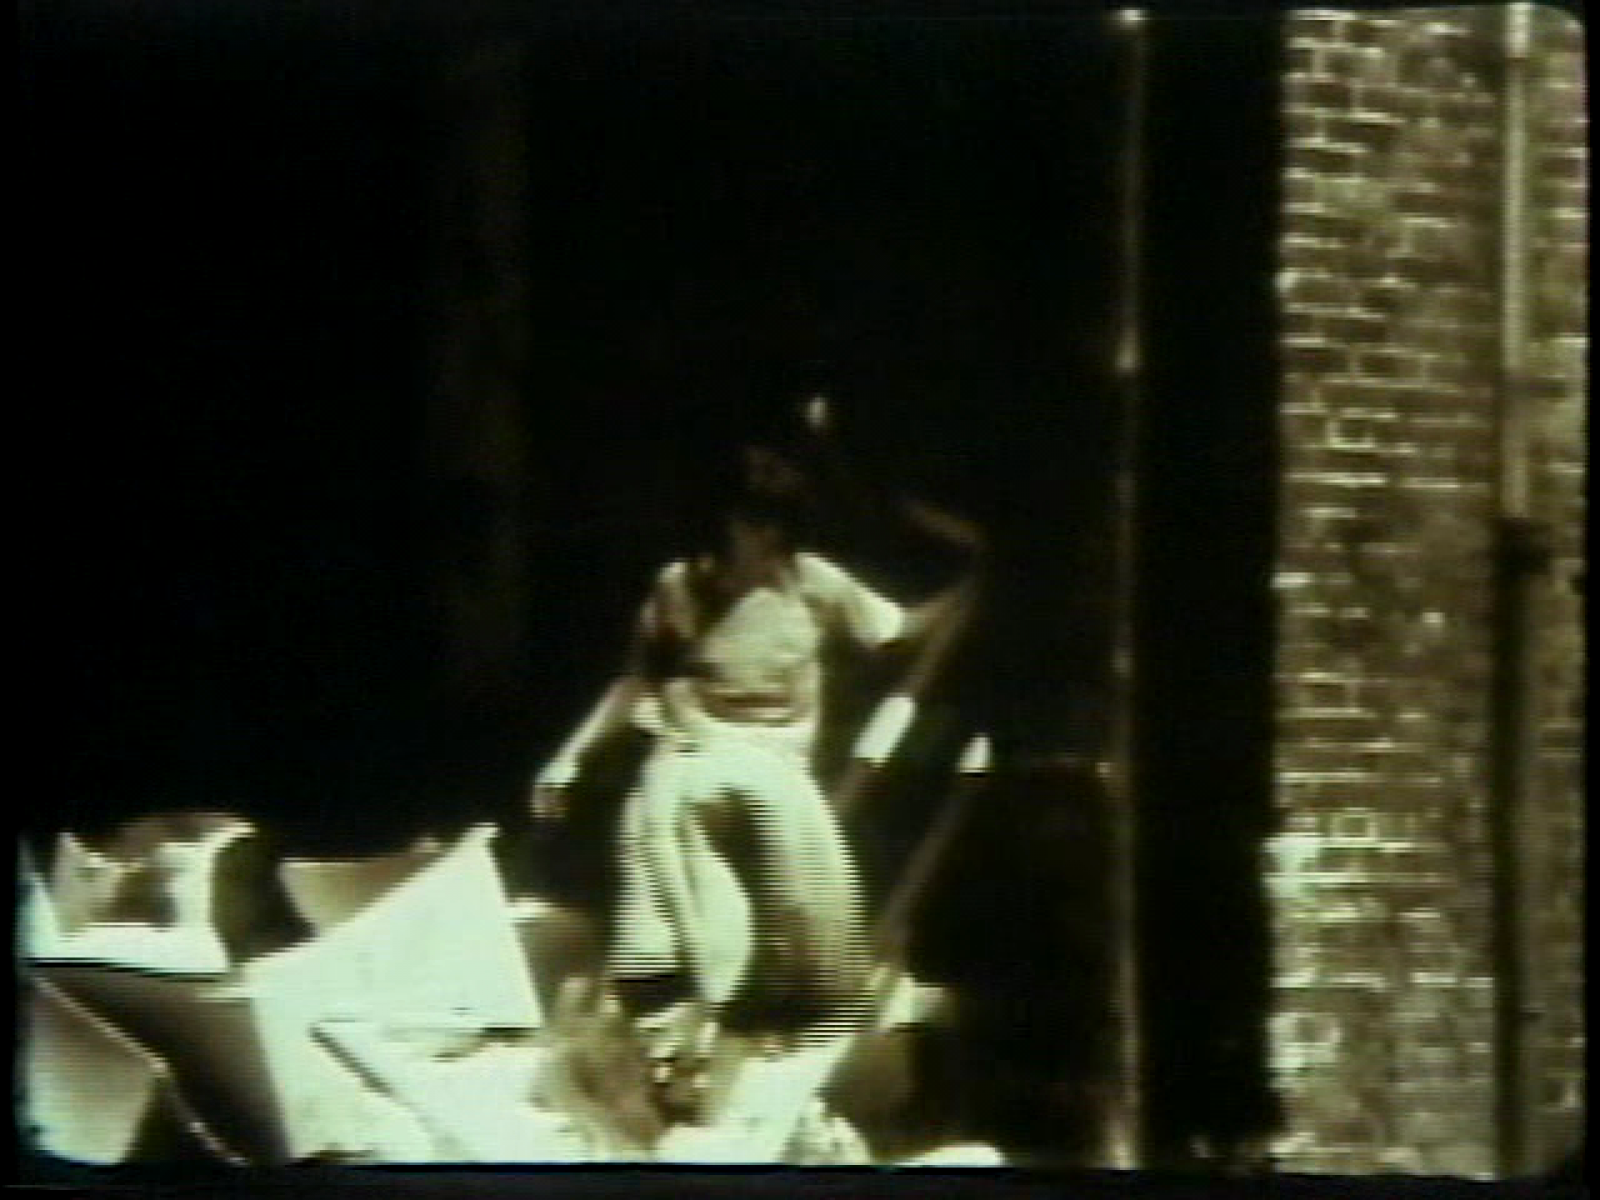 Ian Wallace, Poverty 1980 (still), 1980, 16mm film transferred to digital, dimensions variable